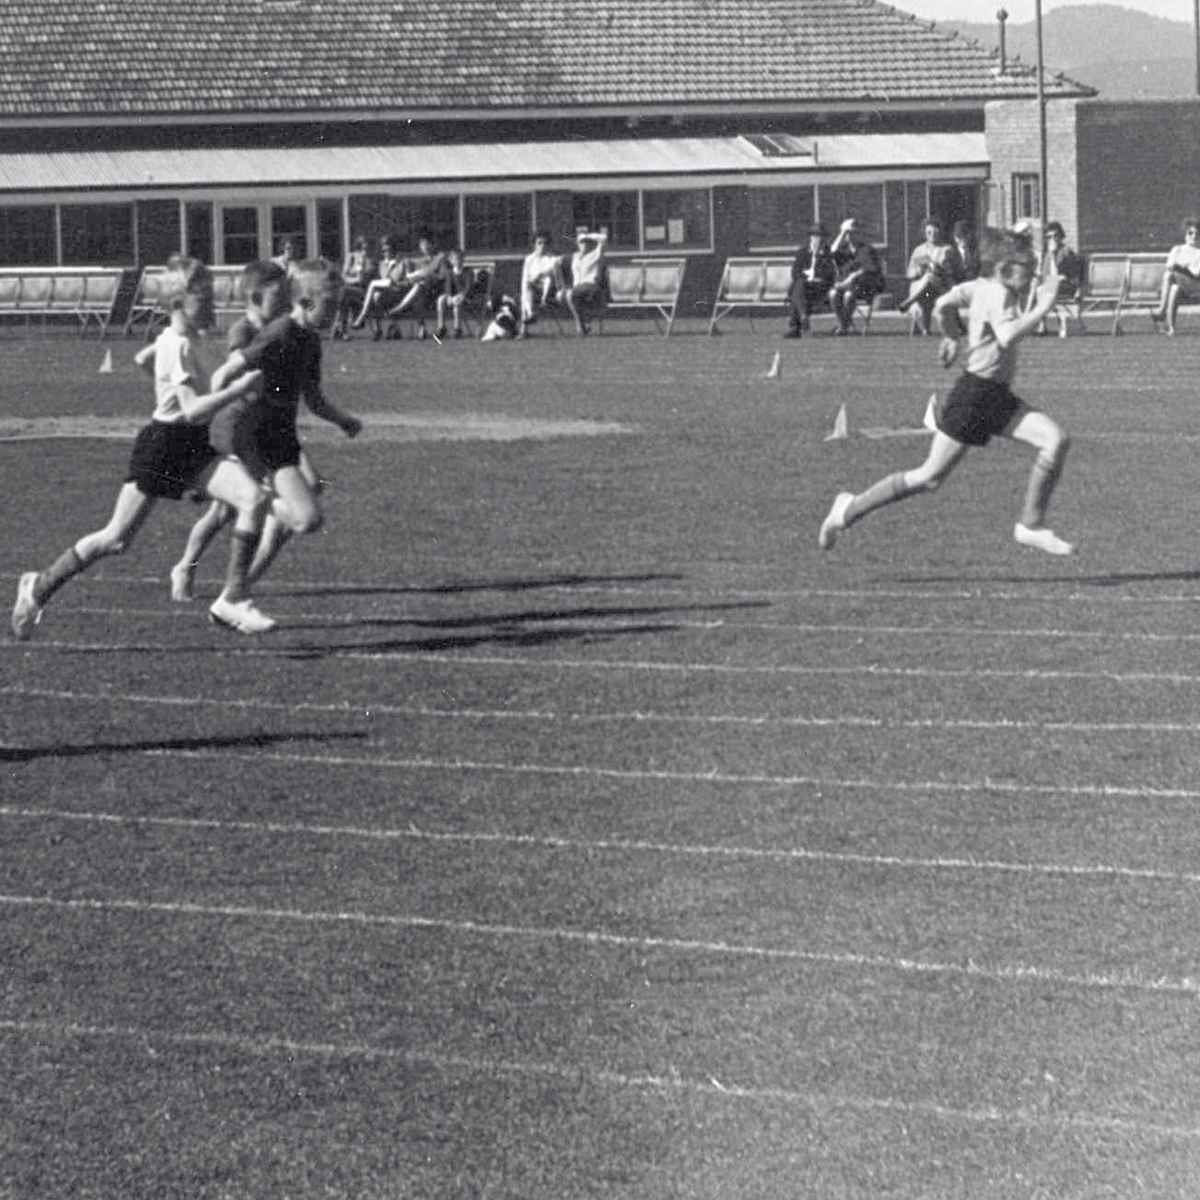 R Bingham wins U11 100yds with former Sub-Primary block (now Middle School) behind, 1960. Source: The Hutchins School Archives and Heritage Collection.